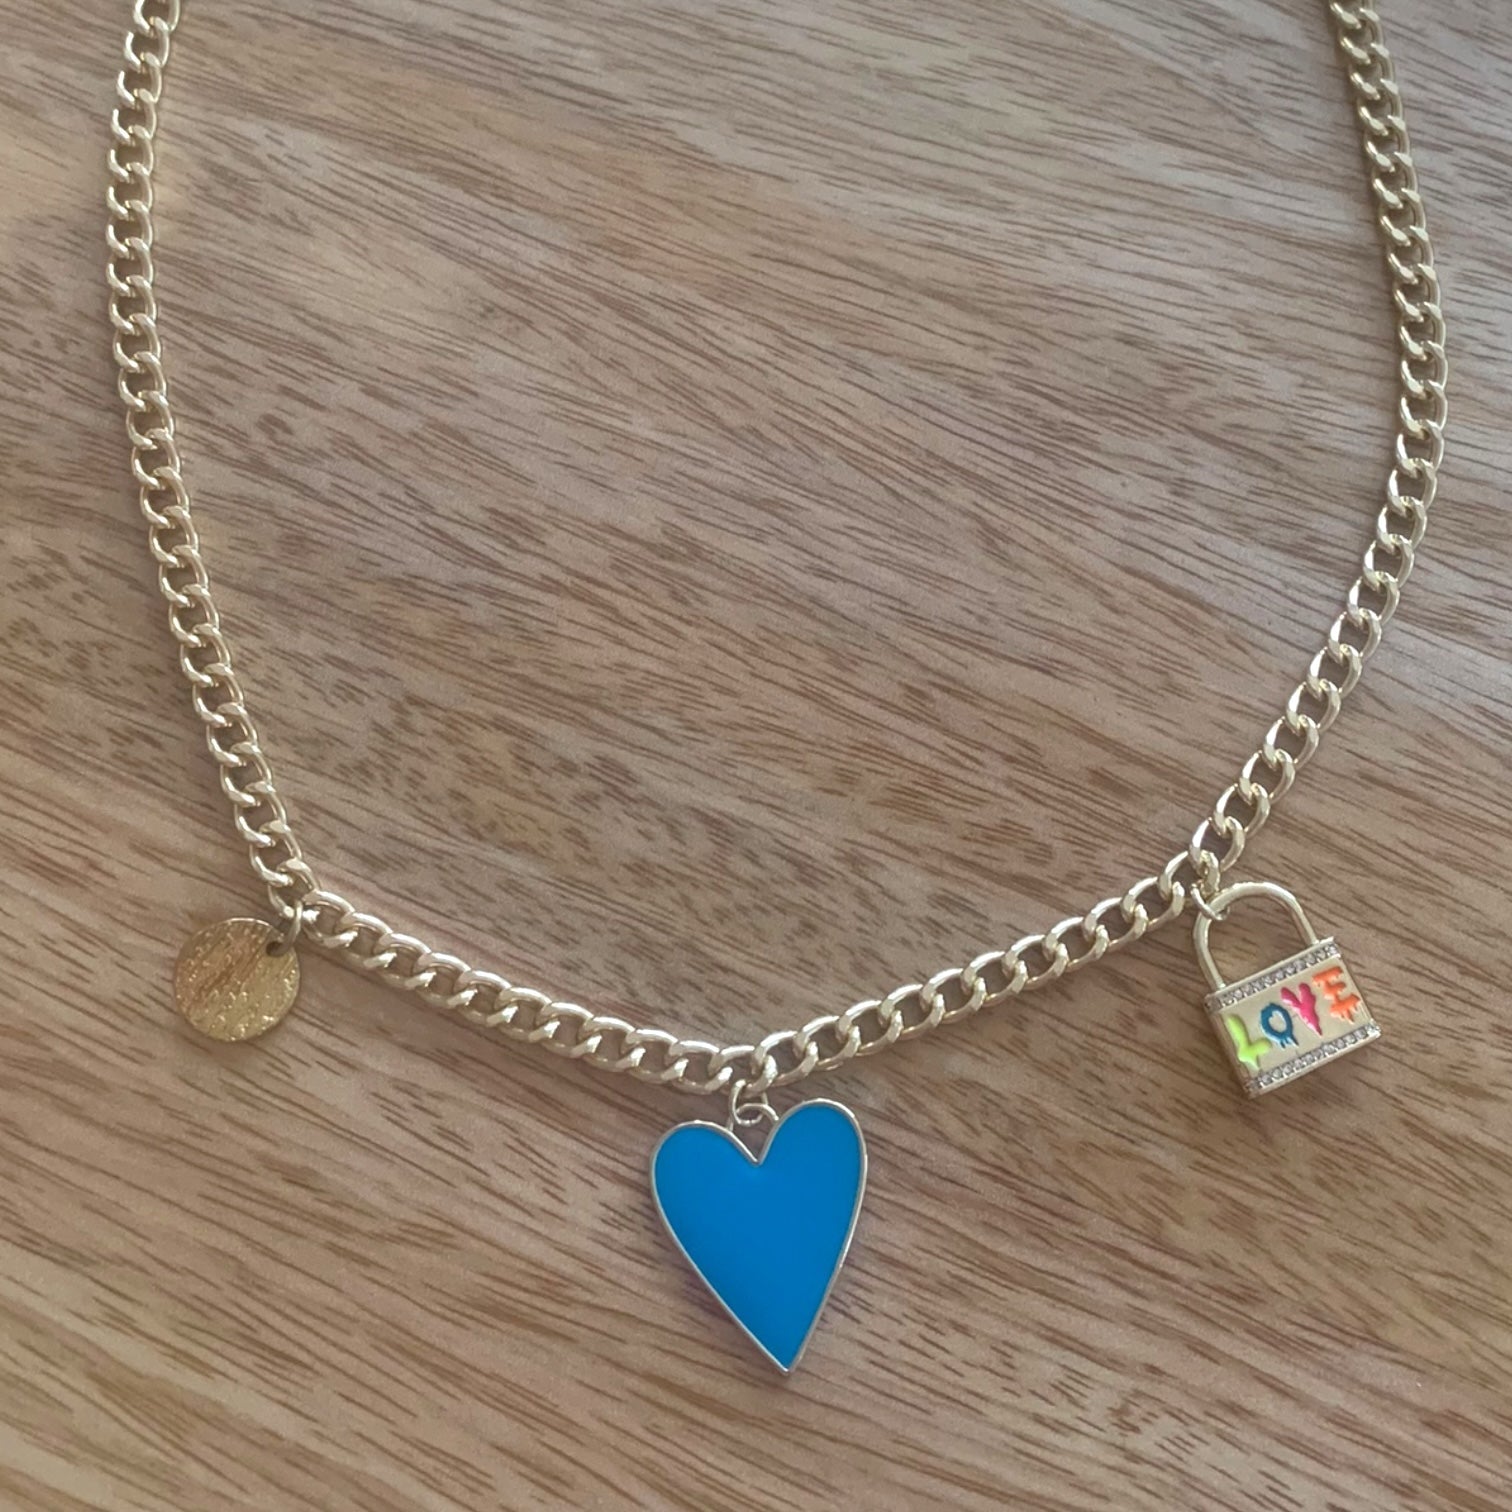 1 of 1 Blue Heart and Gold Love Charm Statement Necklace-Necklace